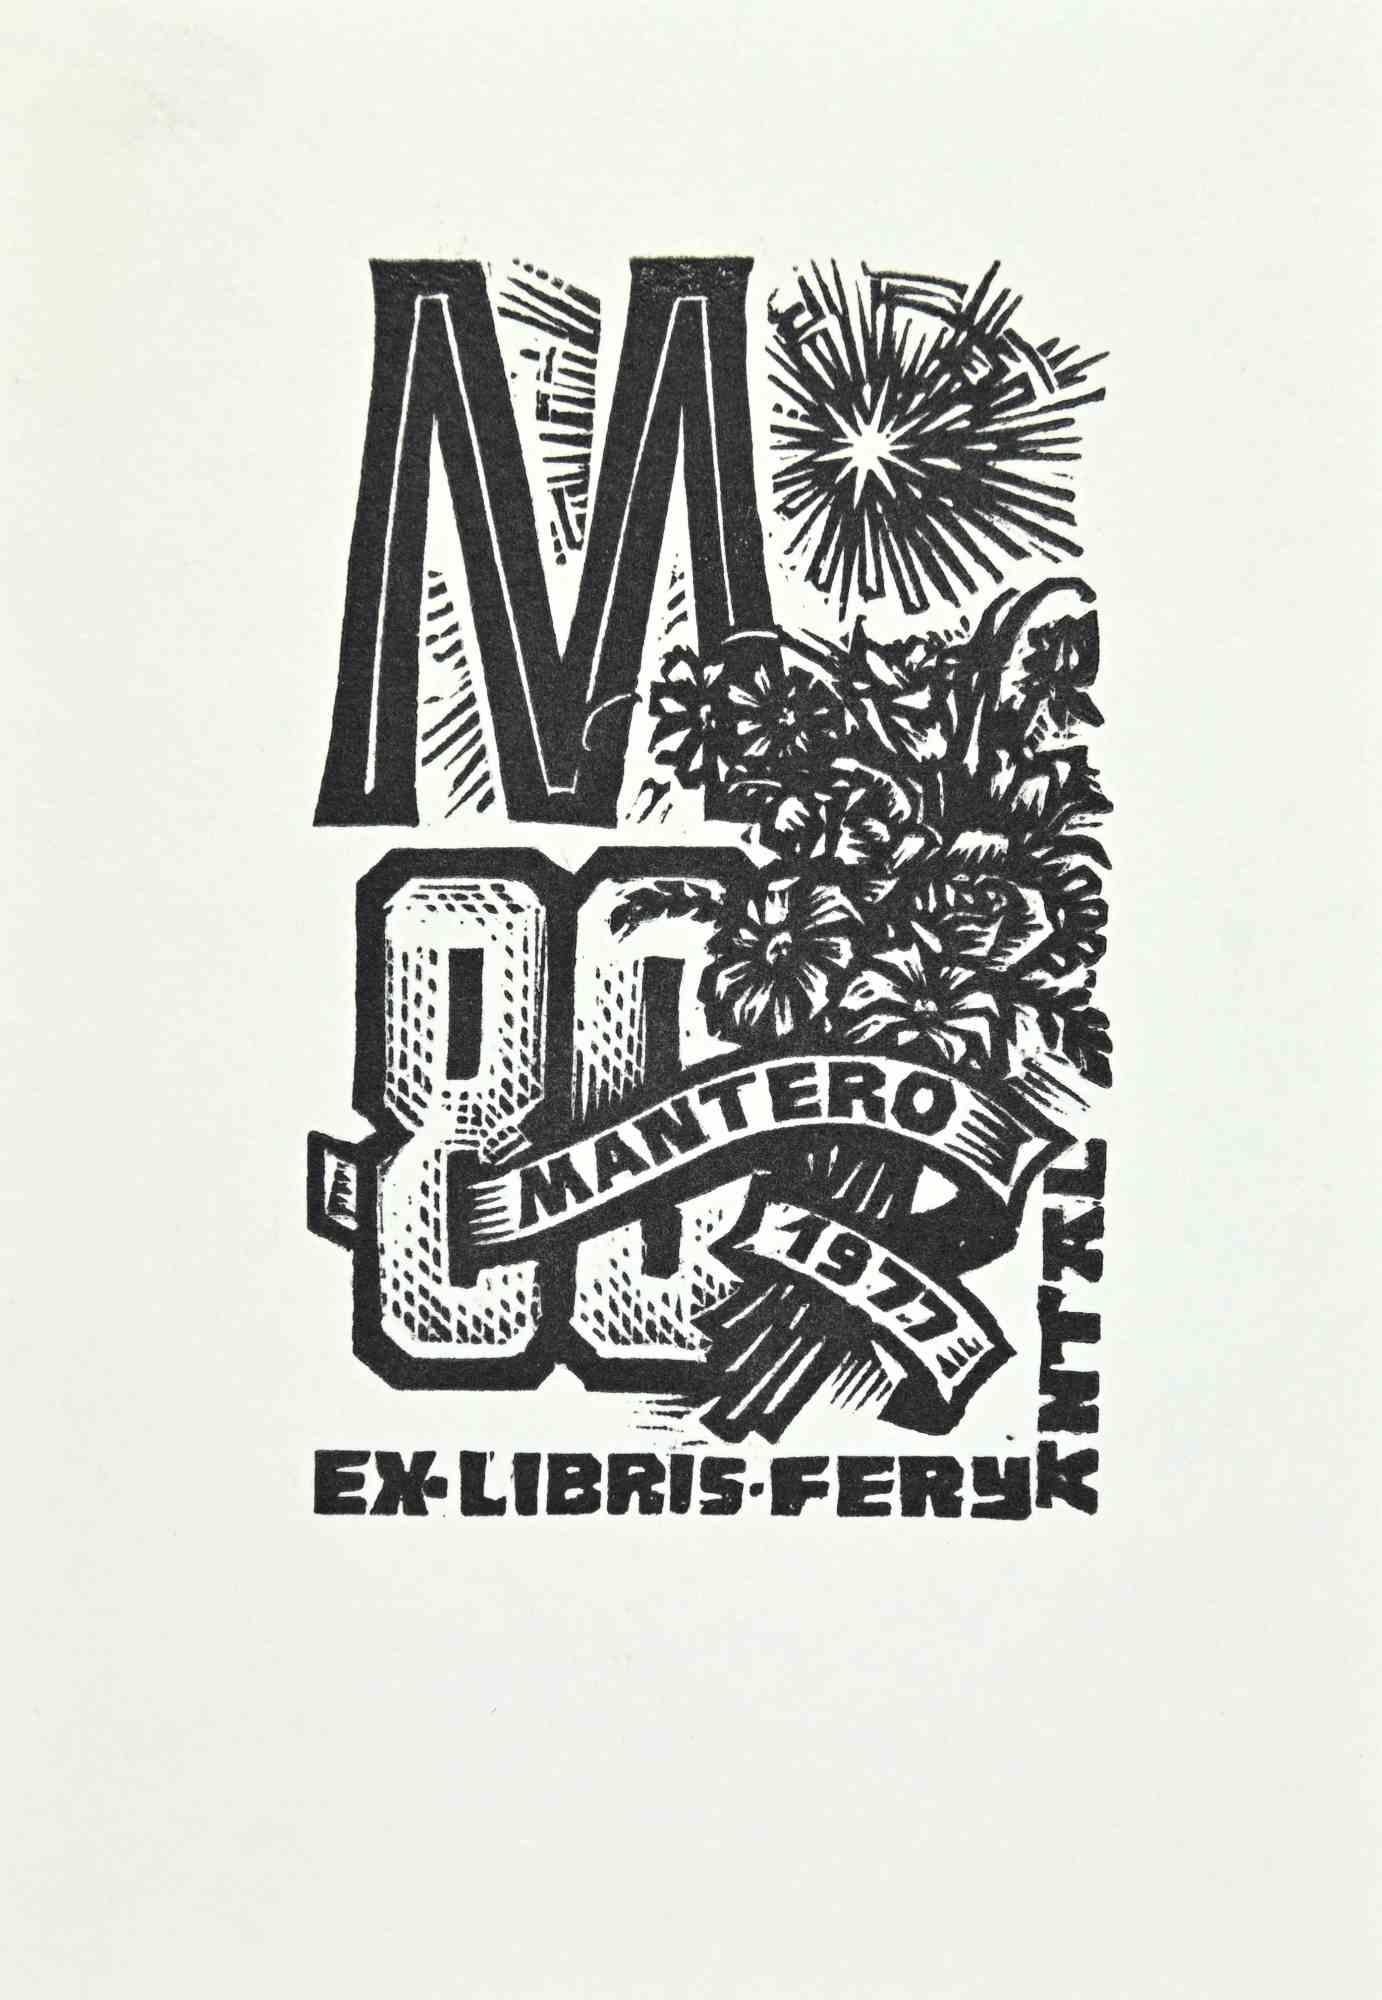 Ex Libris - Fery  Antal  is an Artwork realized in 1977 s. by the Artist Antal Fery.

Woodcut print on paper. Hand Signed on back.

Good conditions.

The artwork represents a minimalistic, clean design, through preciseness and congruous B./W. colors.